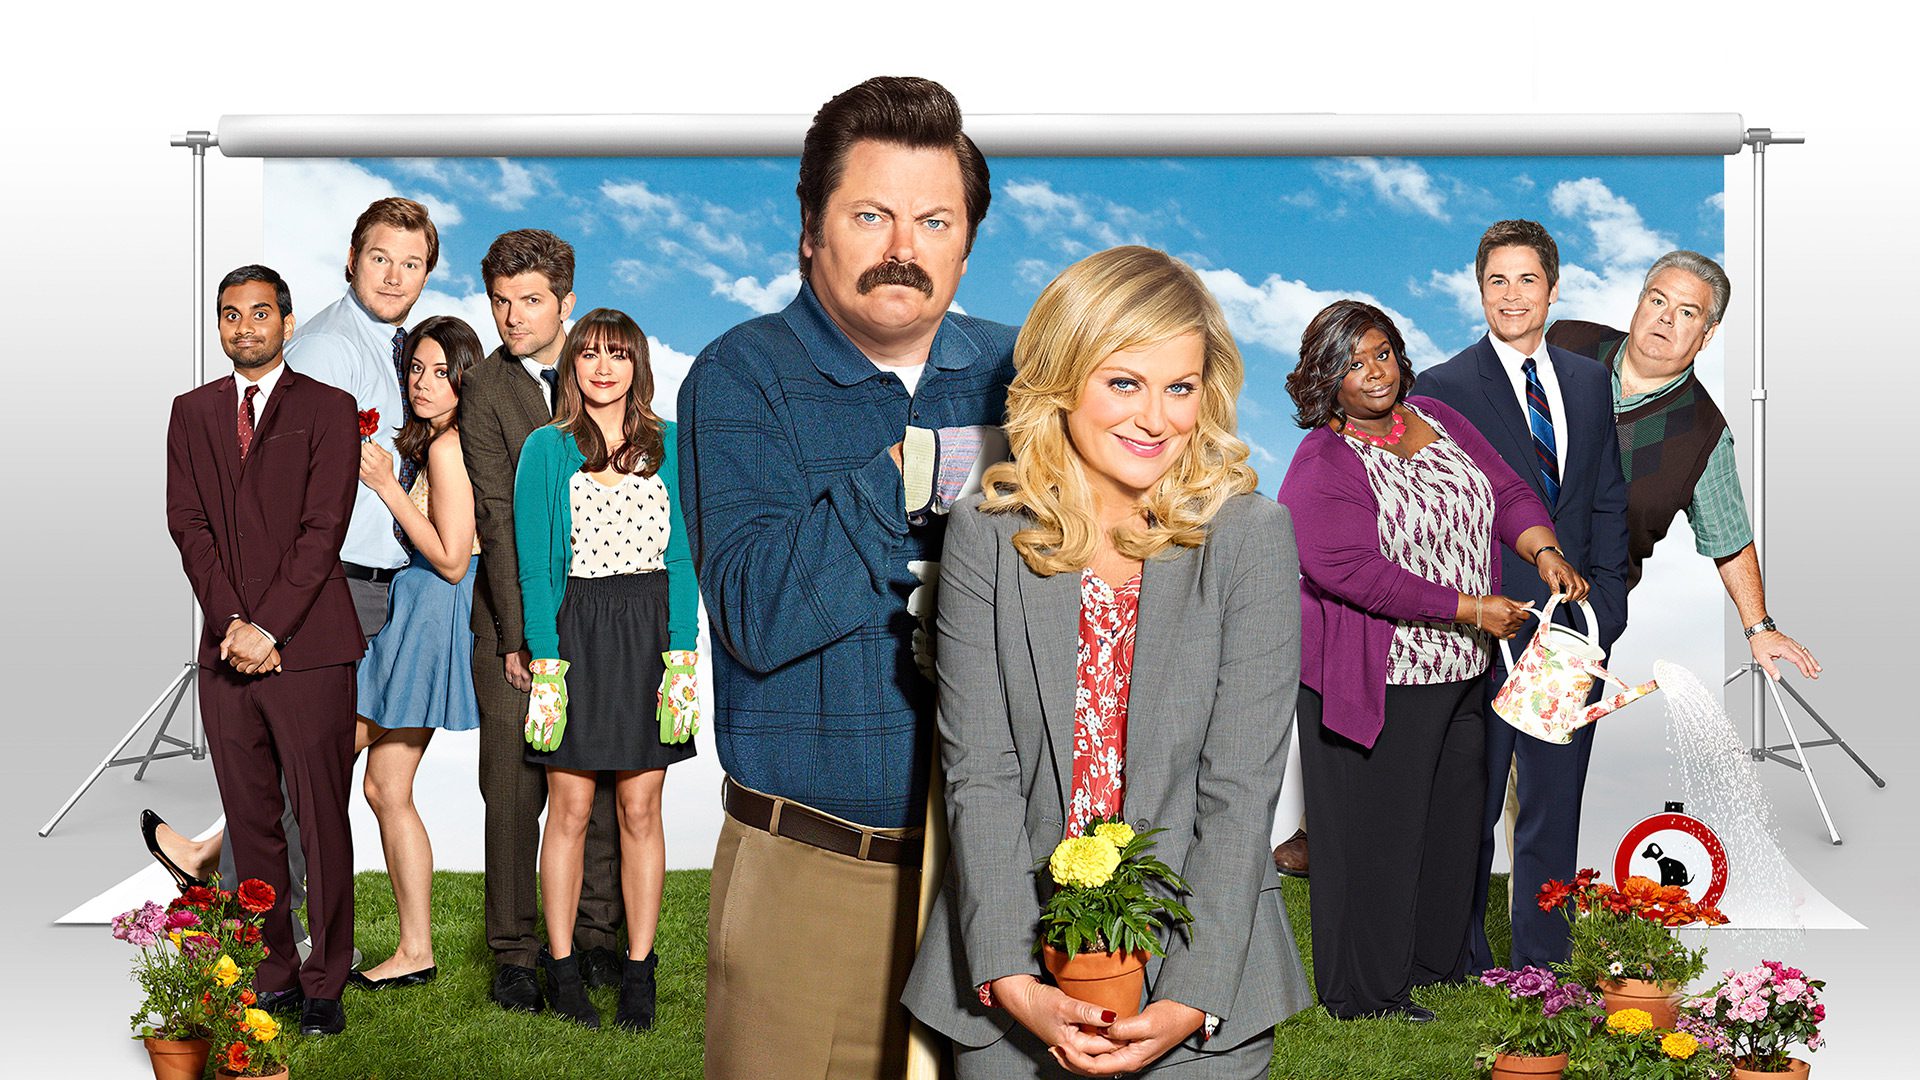 PARKS AND RECREATION